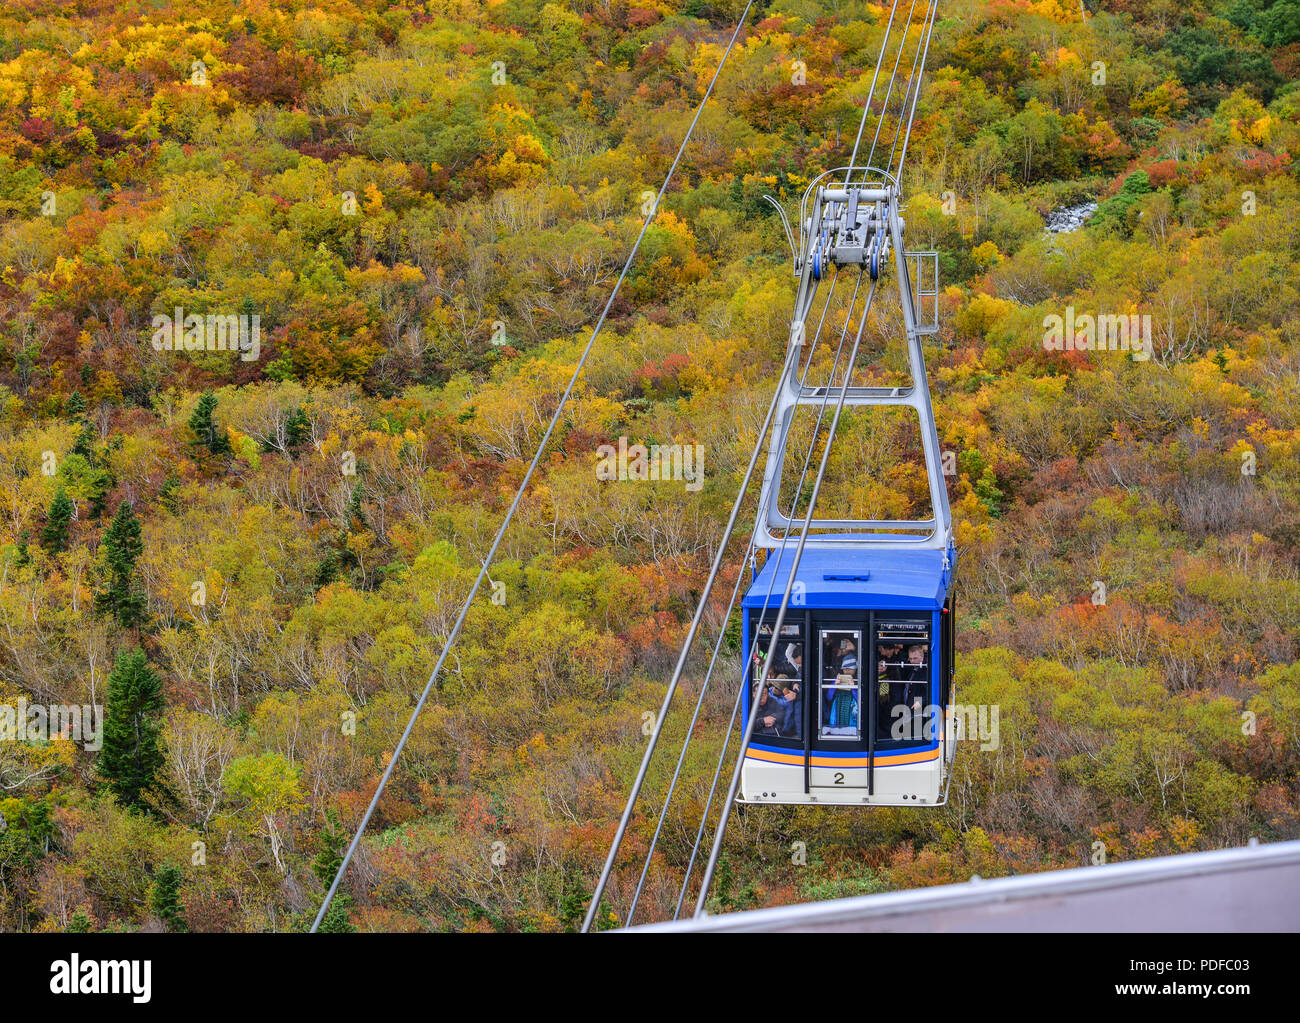 Nagano, Japan - Oct 4, 2017. Cable car way on autumn mountain in Nagano, Japan. Nagano was the site of the Olympic Winter Games 1998. Stock Photo